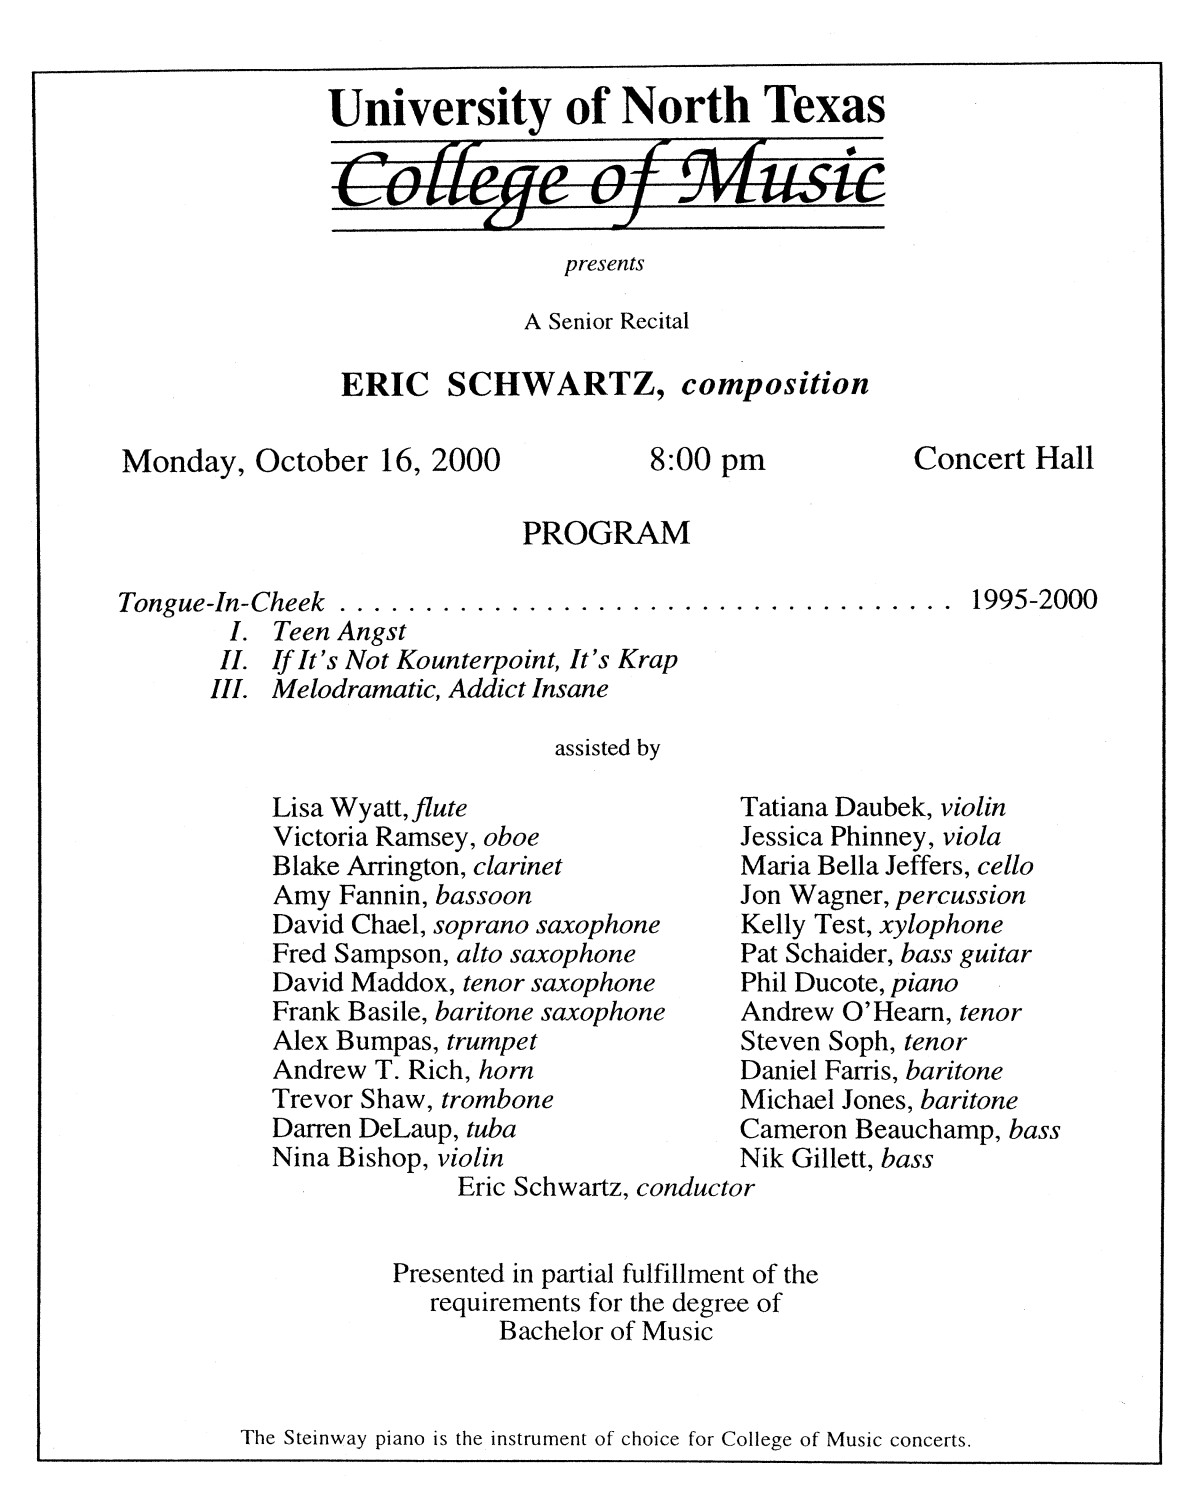 College of Music program book 2000-2001 Student Performances Vol. 2
                                                
                                                    [Sequence #]: 12 of 274
                                                